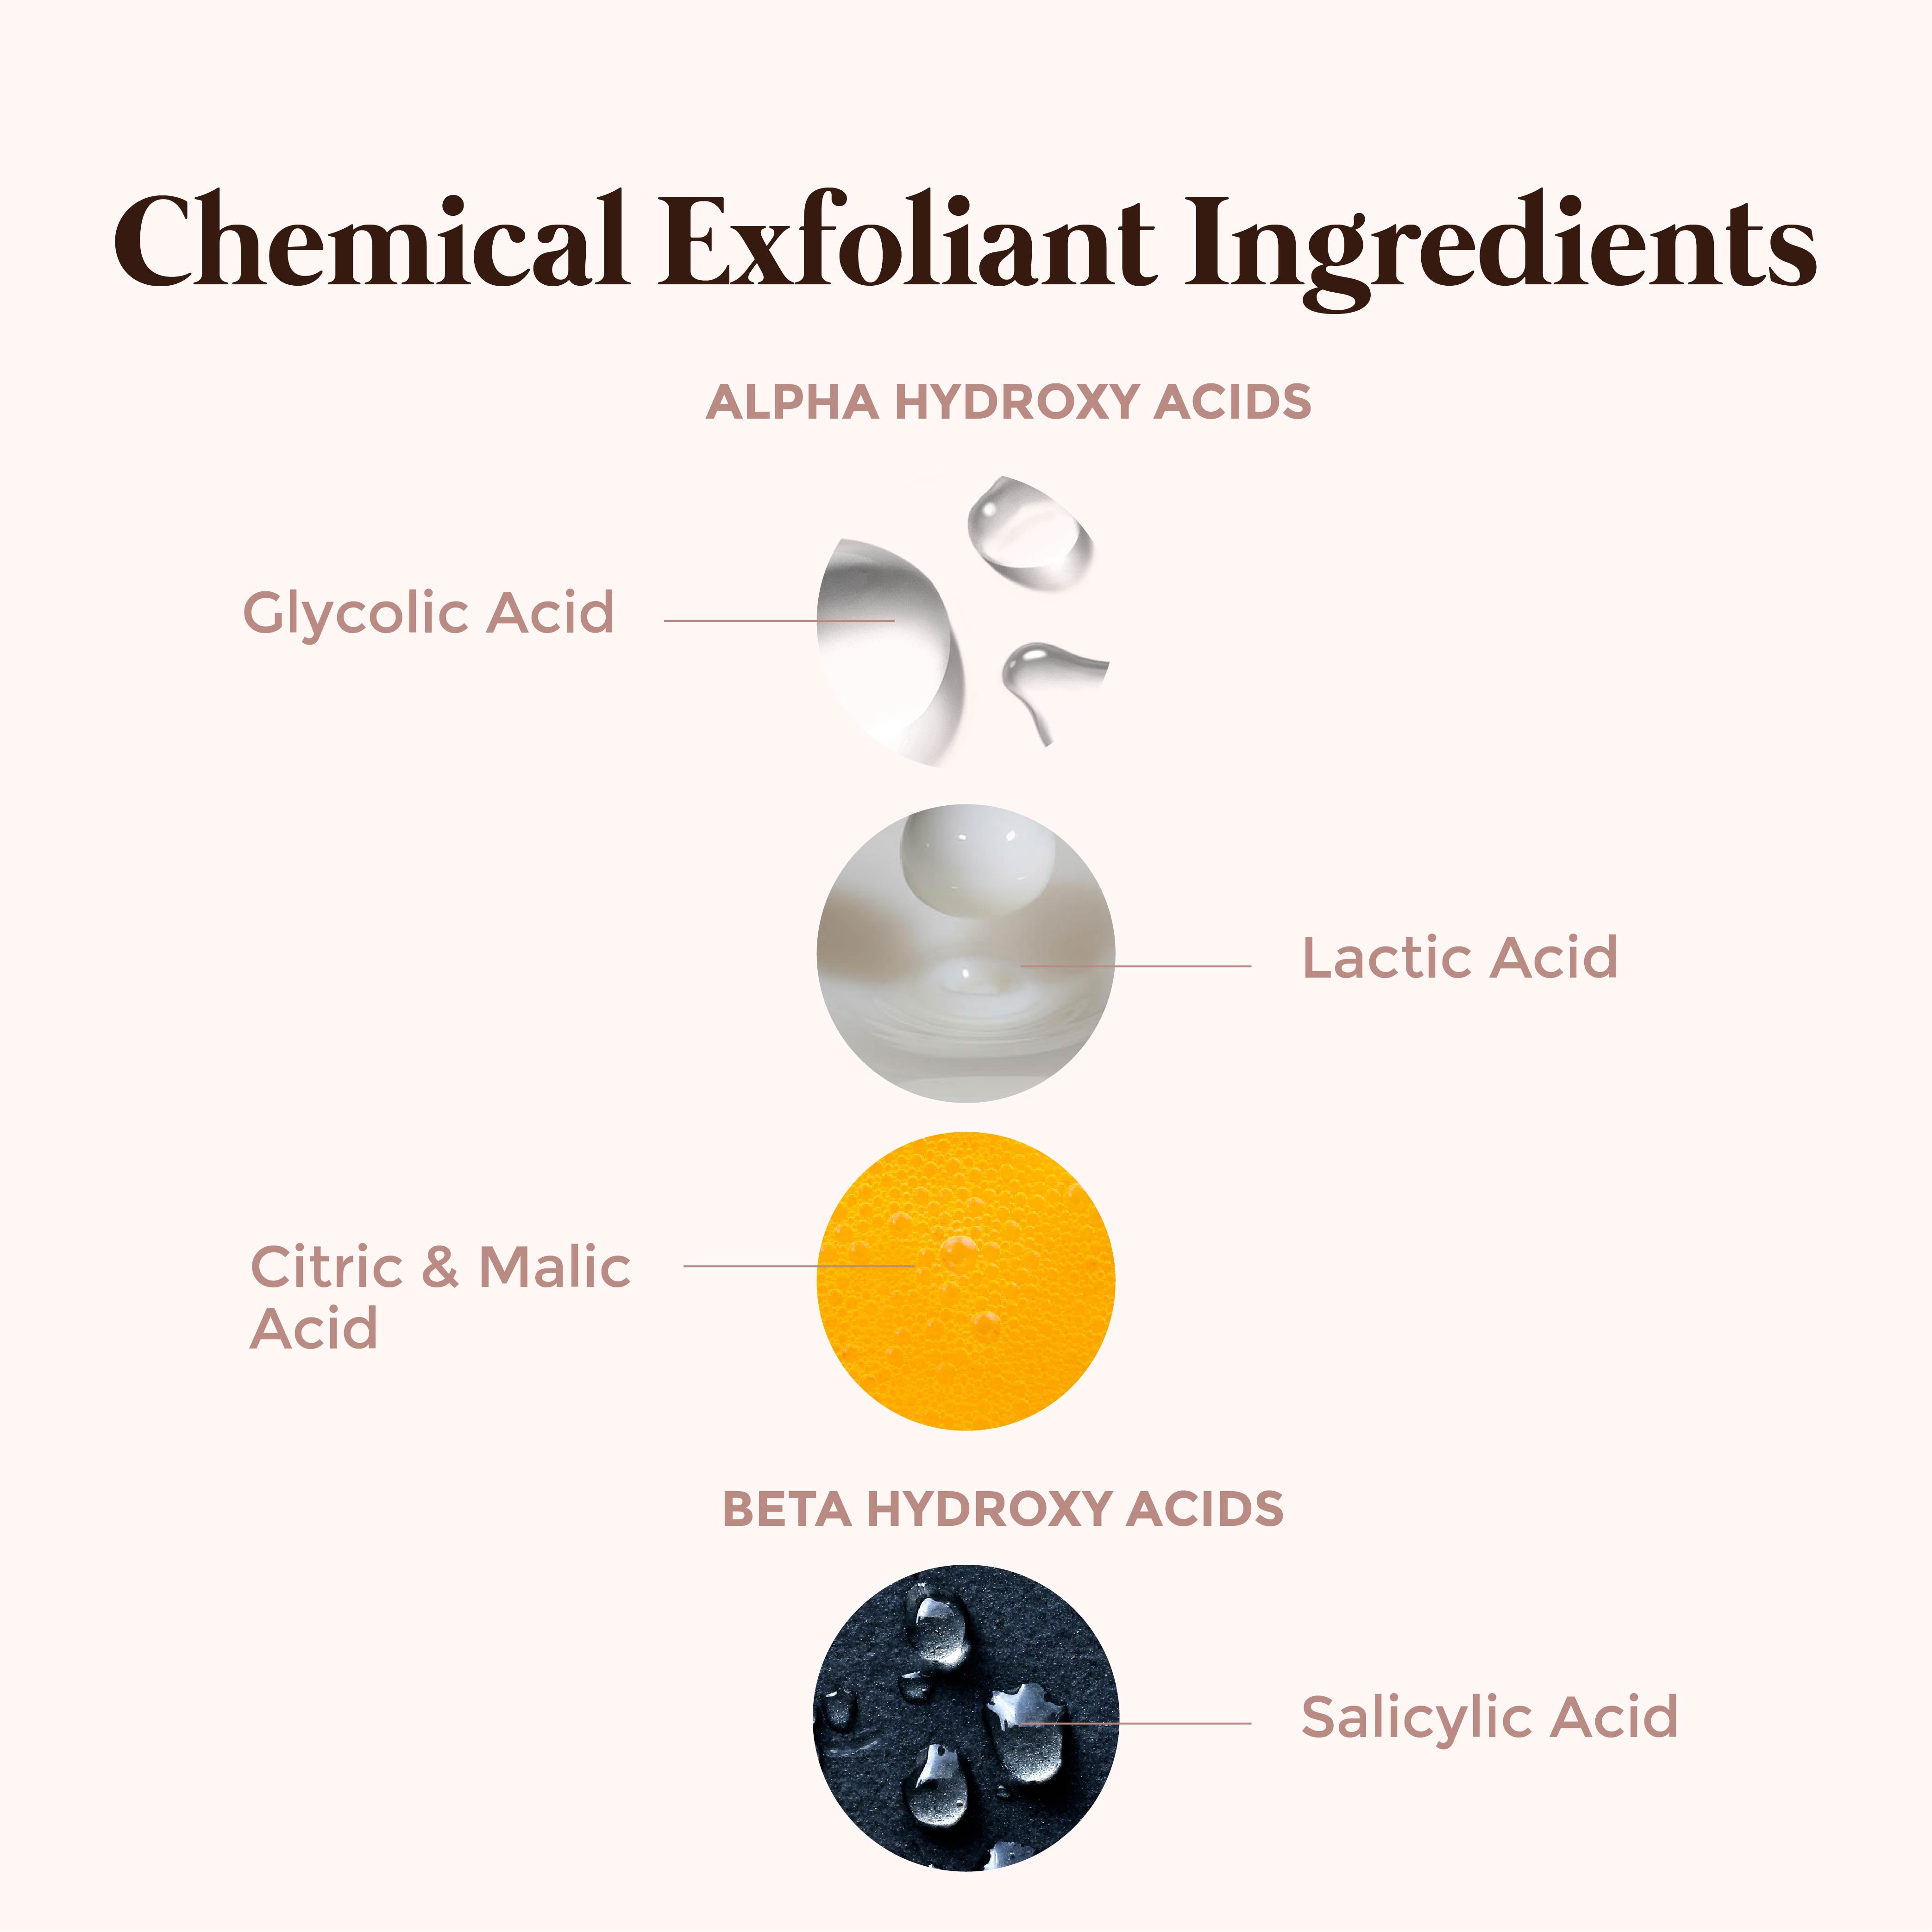 This is an image of the different chemical exfoliators on www.sublimelife.in